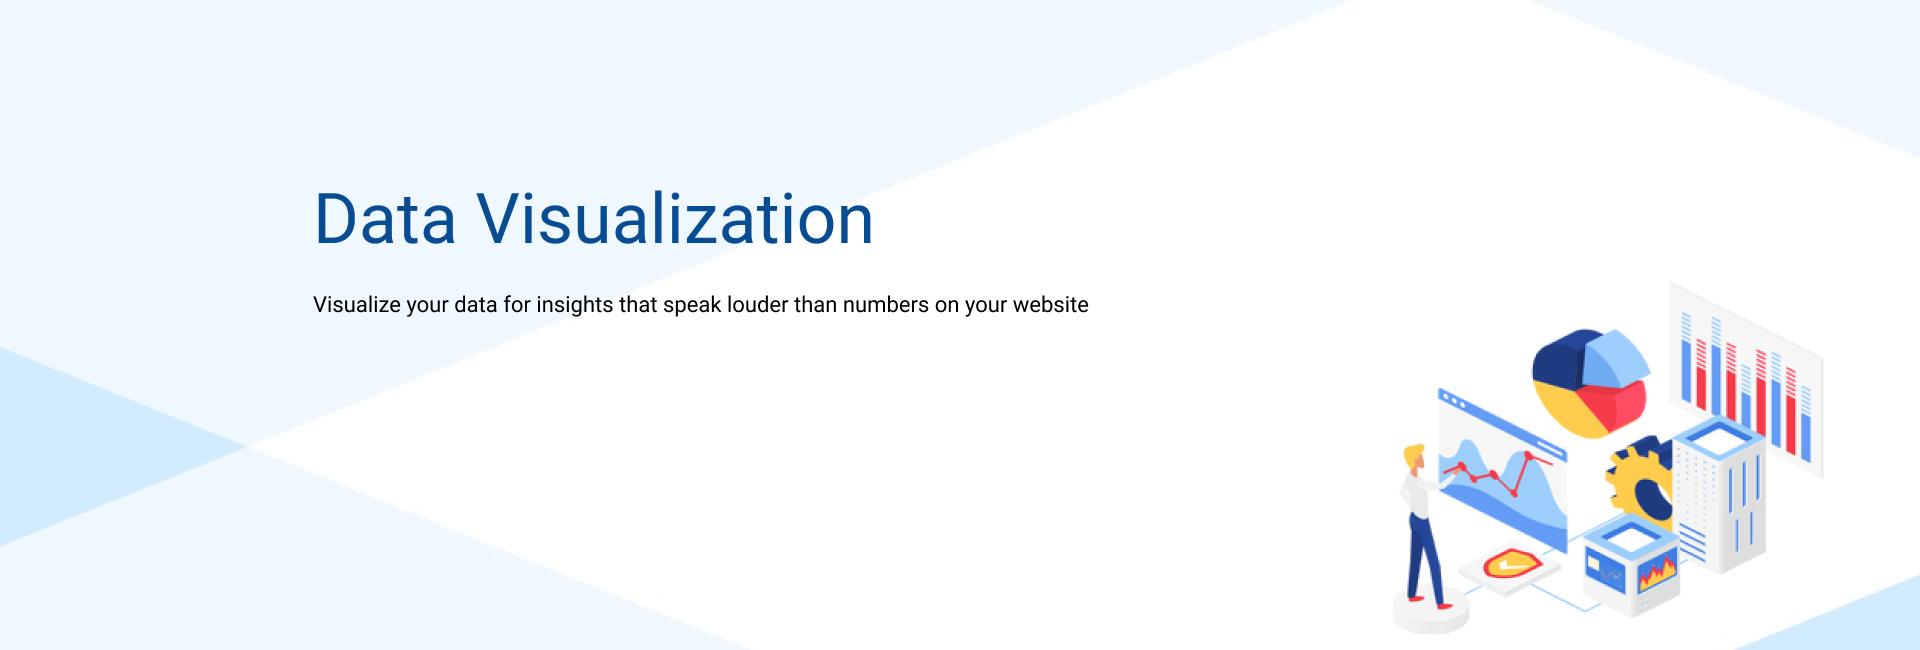 Visualize your data for insights that speak louder than numbers on your website